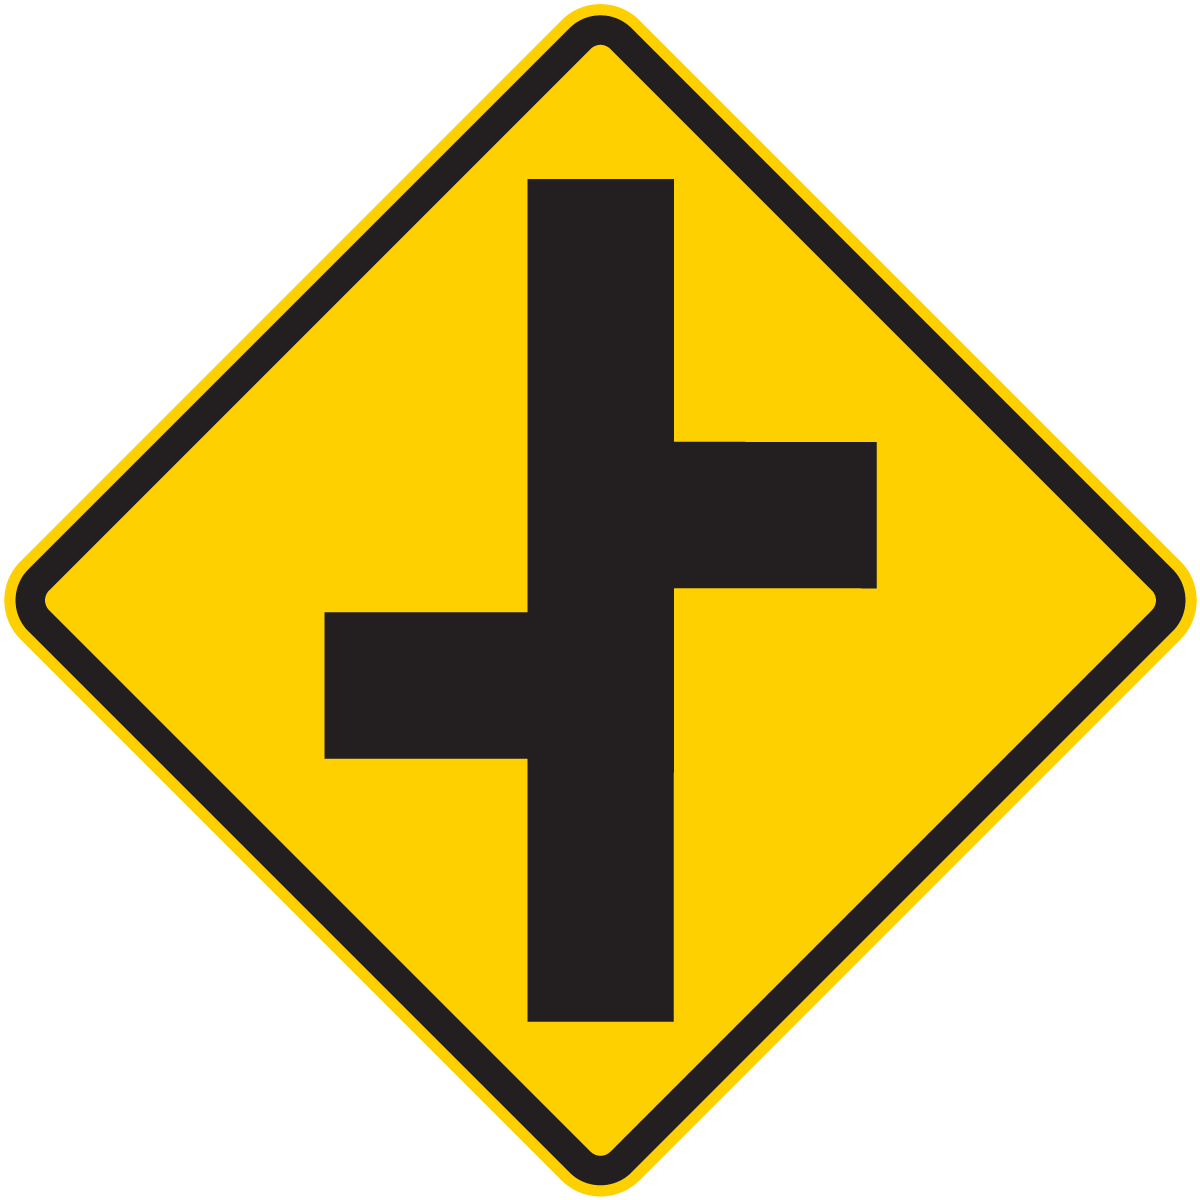 W2-7 Offset Side Road Intersection (Left or Right)